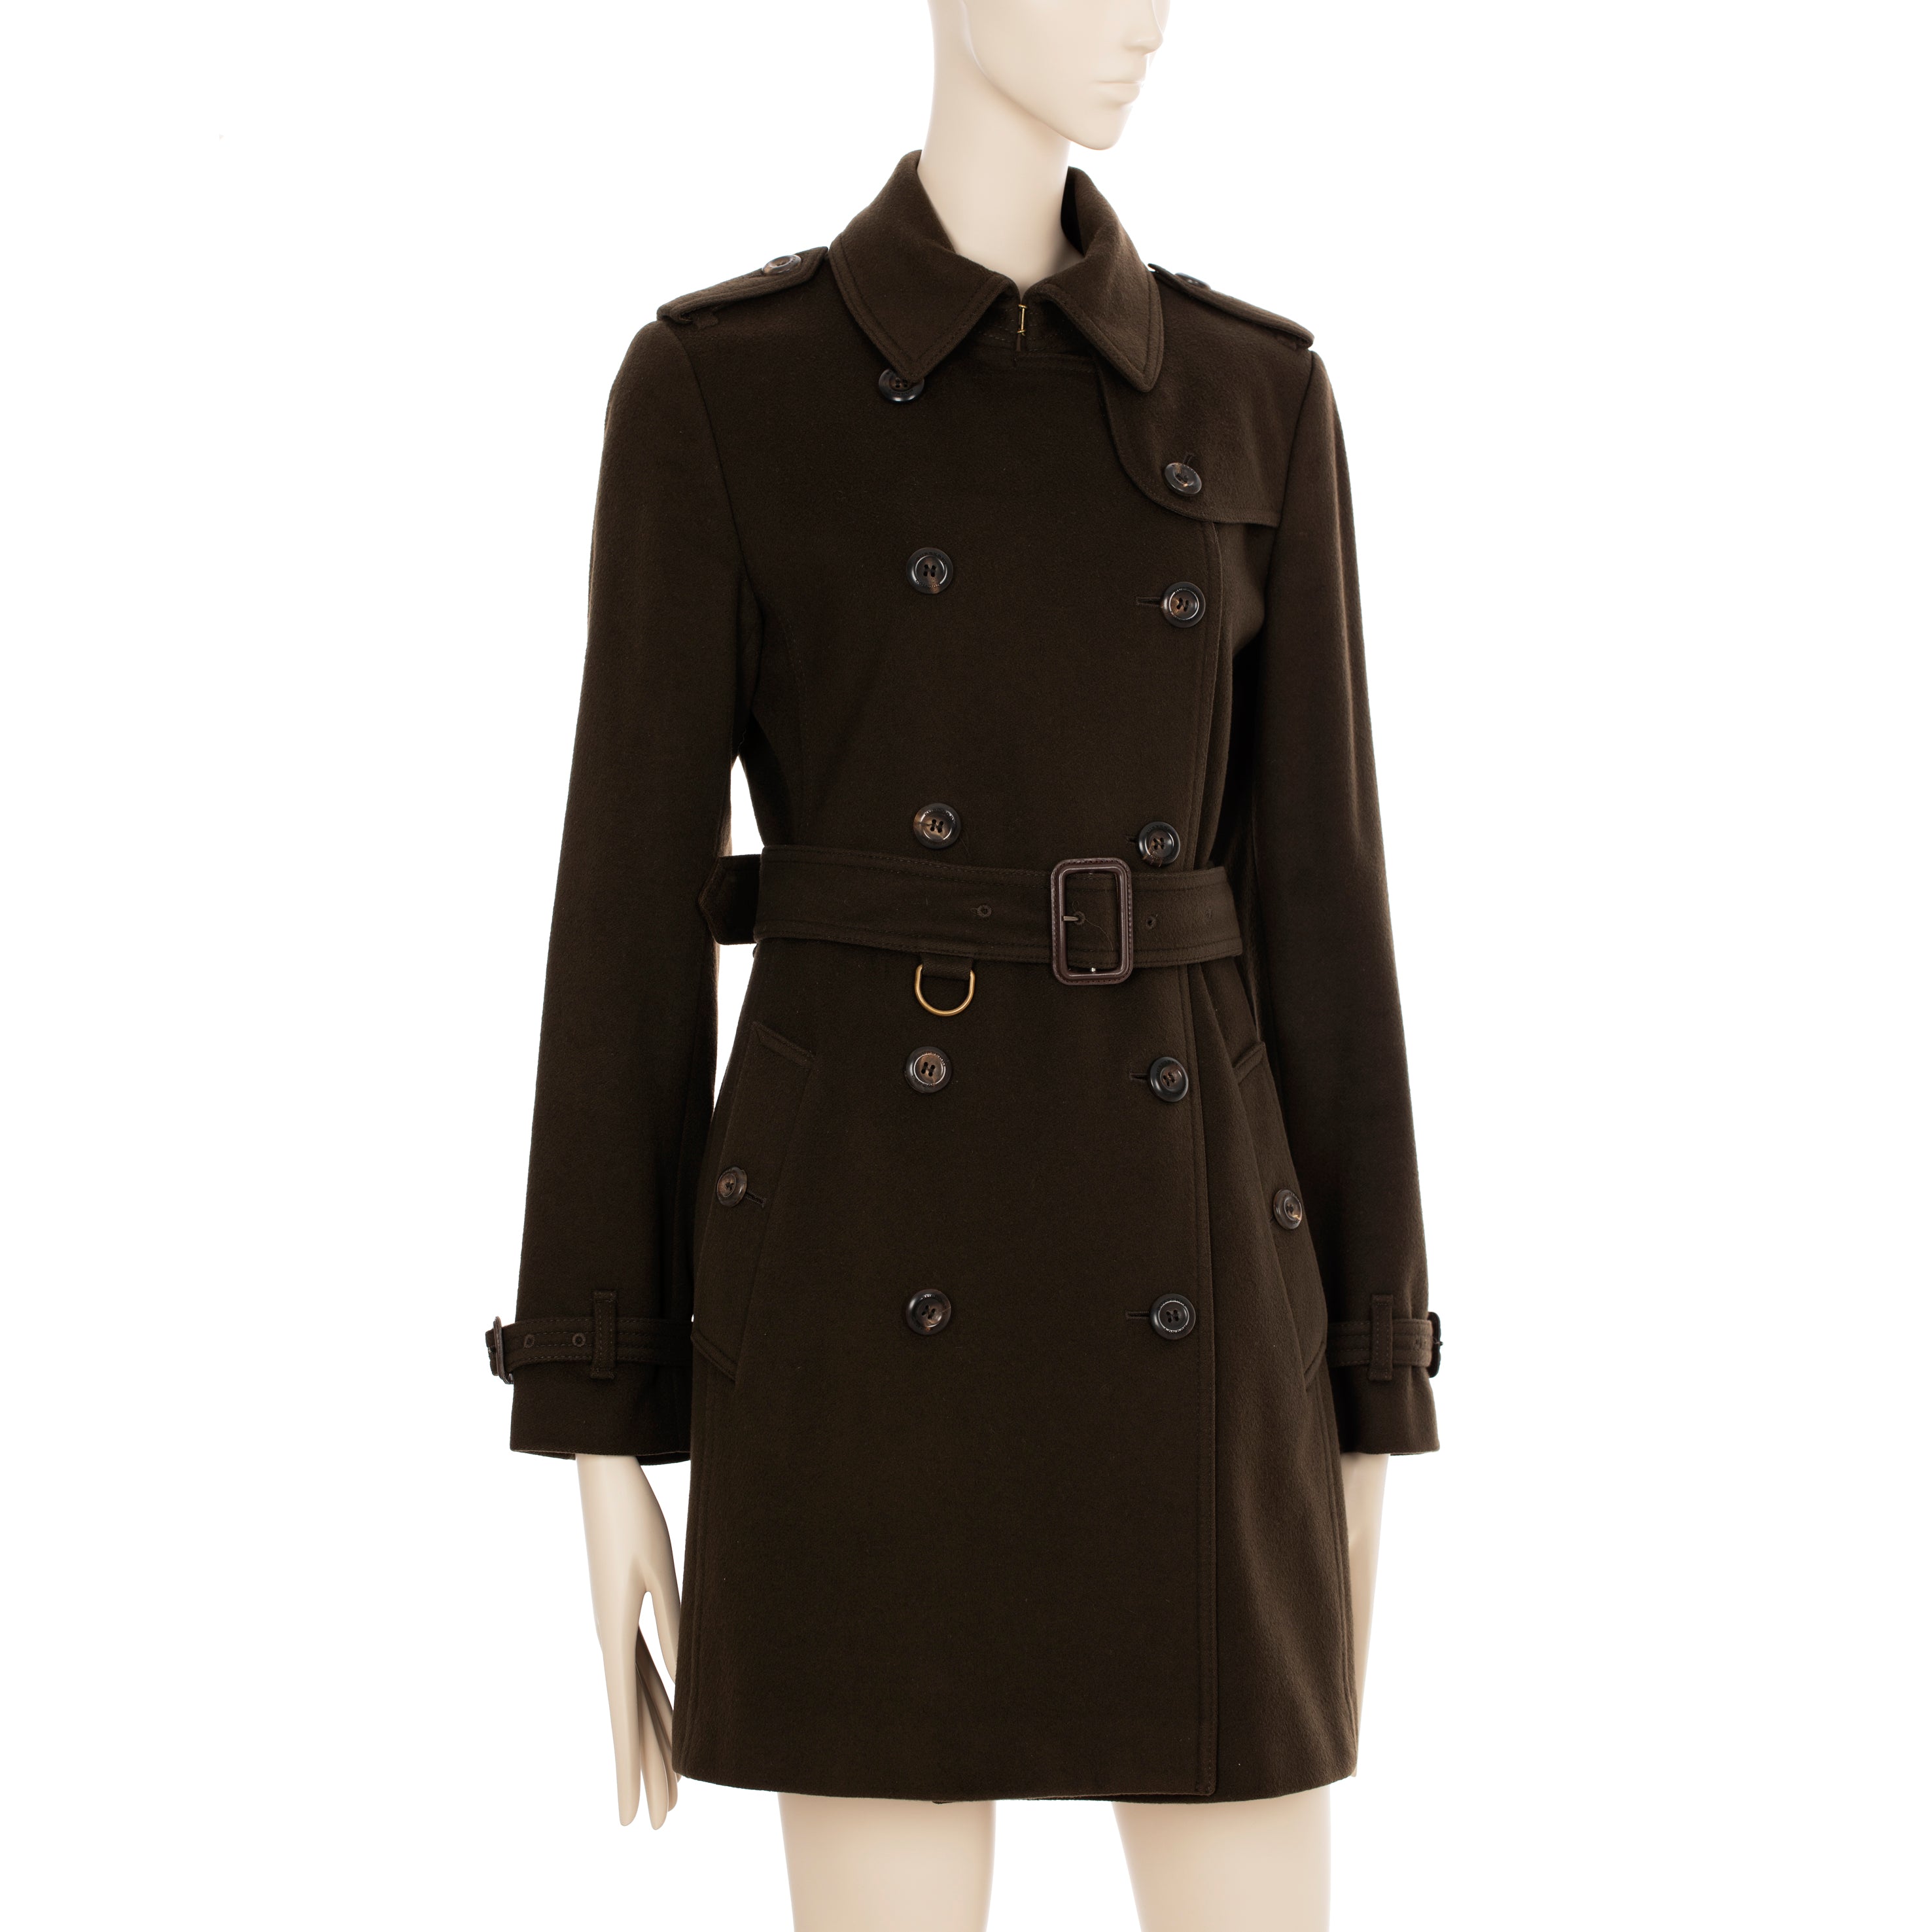 Burberry Chocolate Wool & Cashmere Trench Coat 38 IT